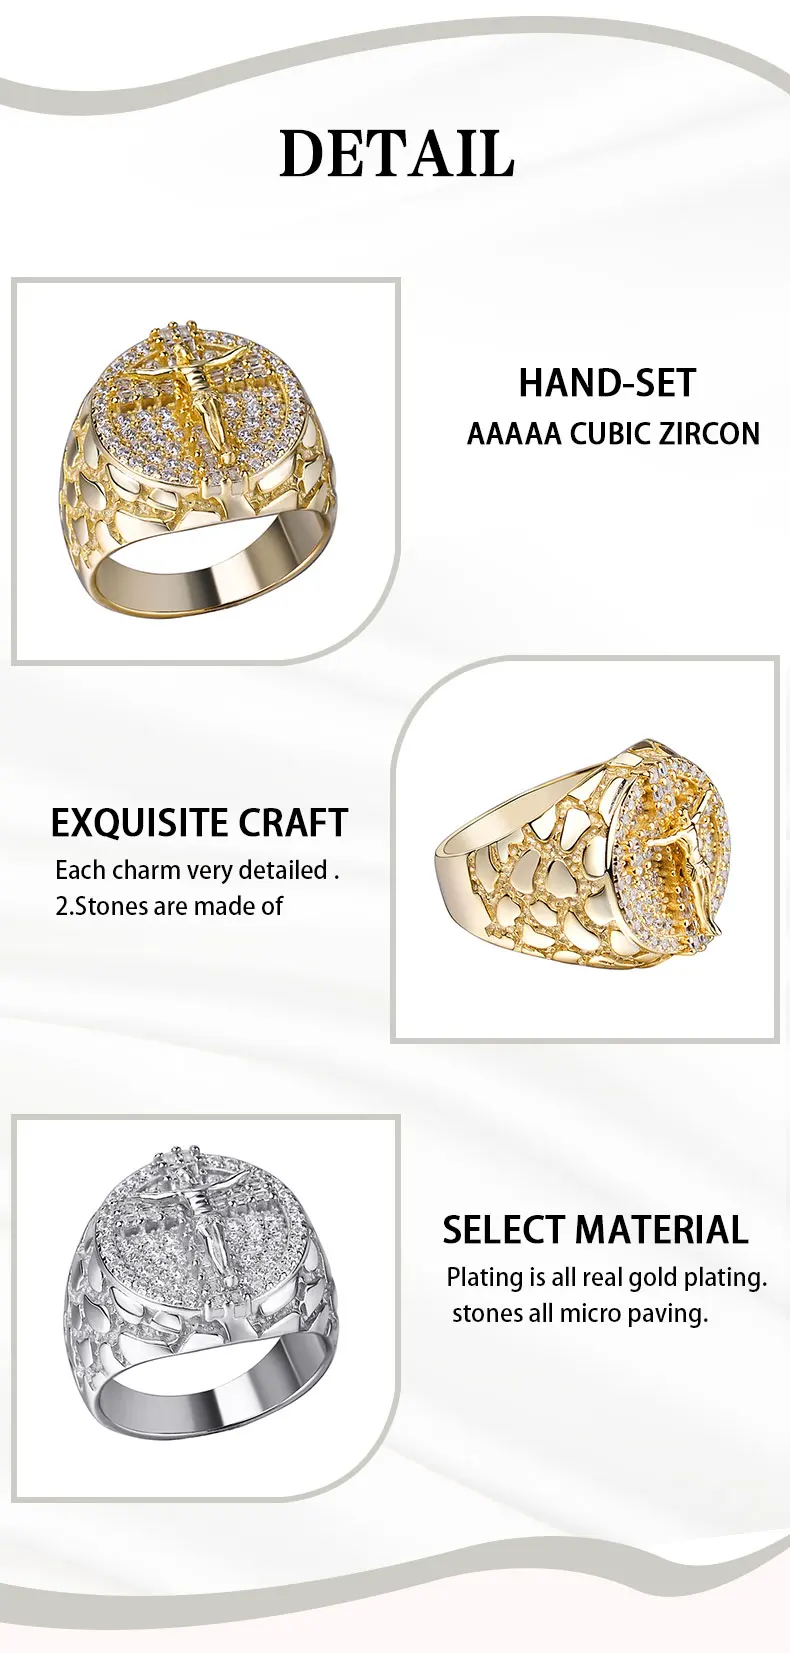 Custom 18k Gold Plated Iced Out Ring Jewellery Or Fashion 925 Silver Cz Paved Jewelry Rings For Men